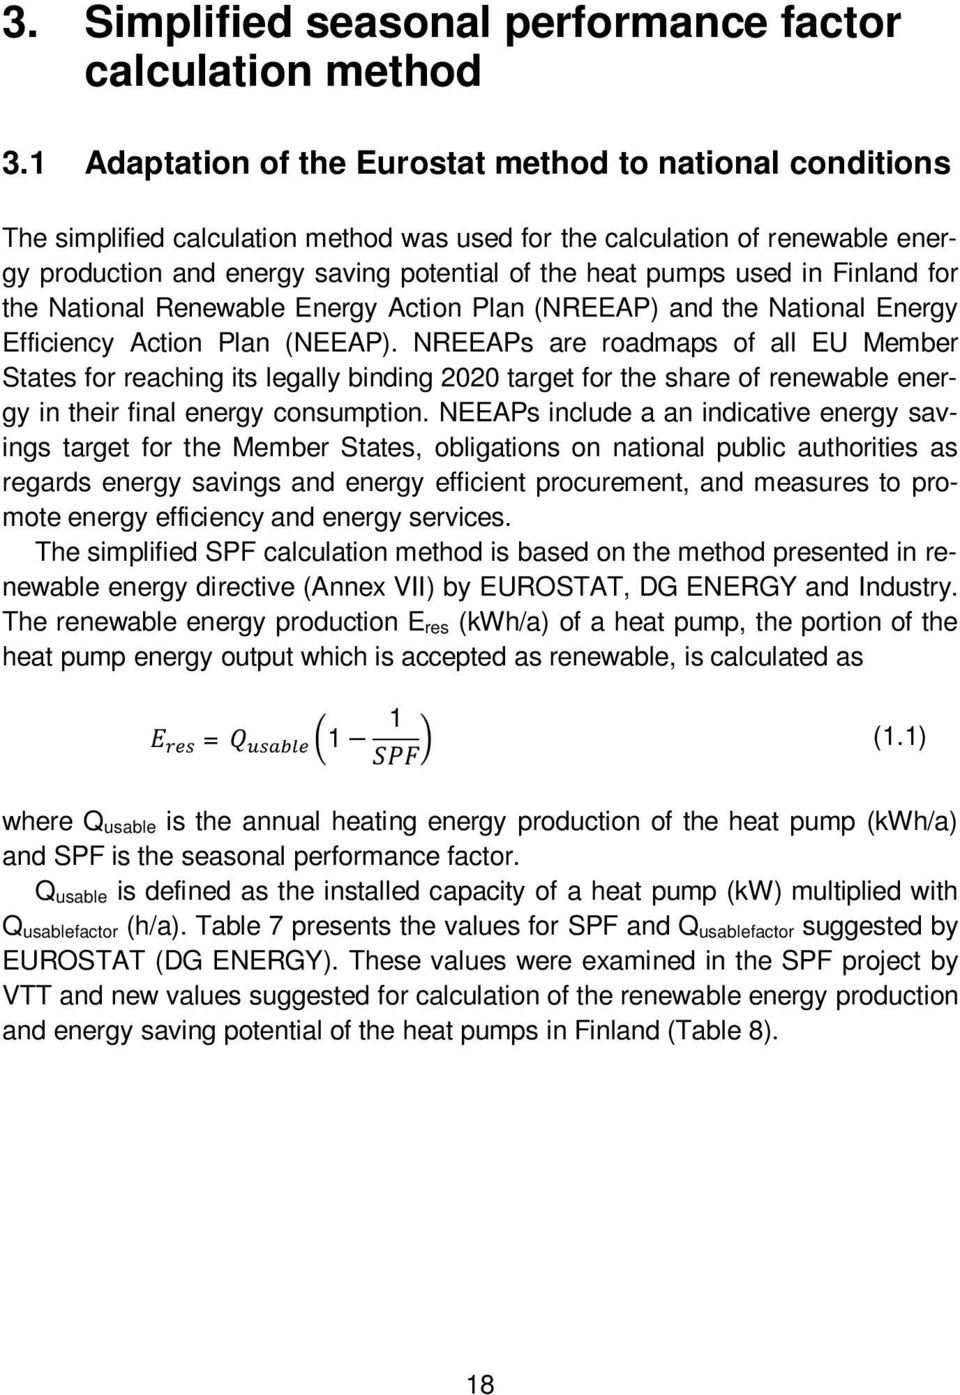 1 Adaptation of the Eurostat method to national conditions The simplified calculation method was used for the calculation of renewable energy production and energy saving potential of the heat pumps